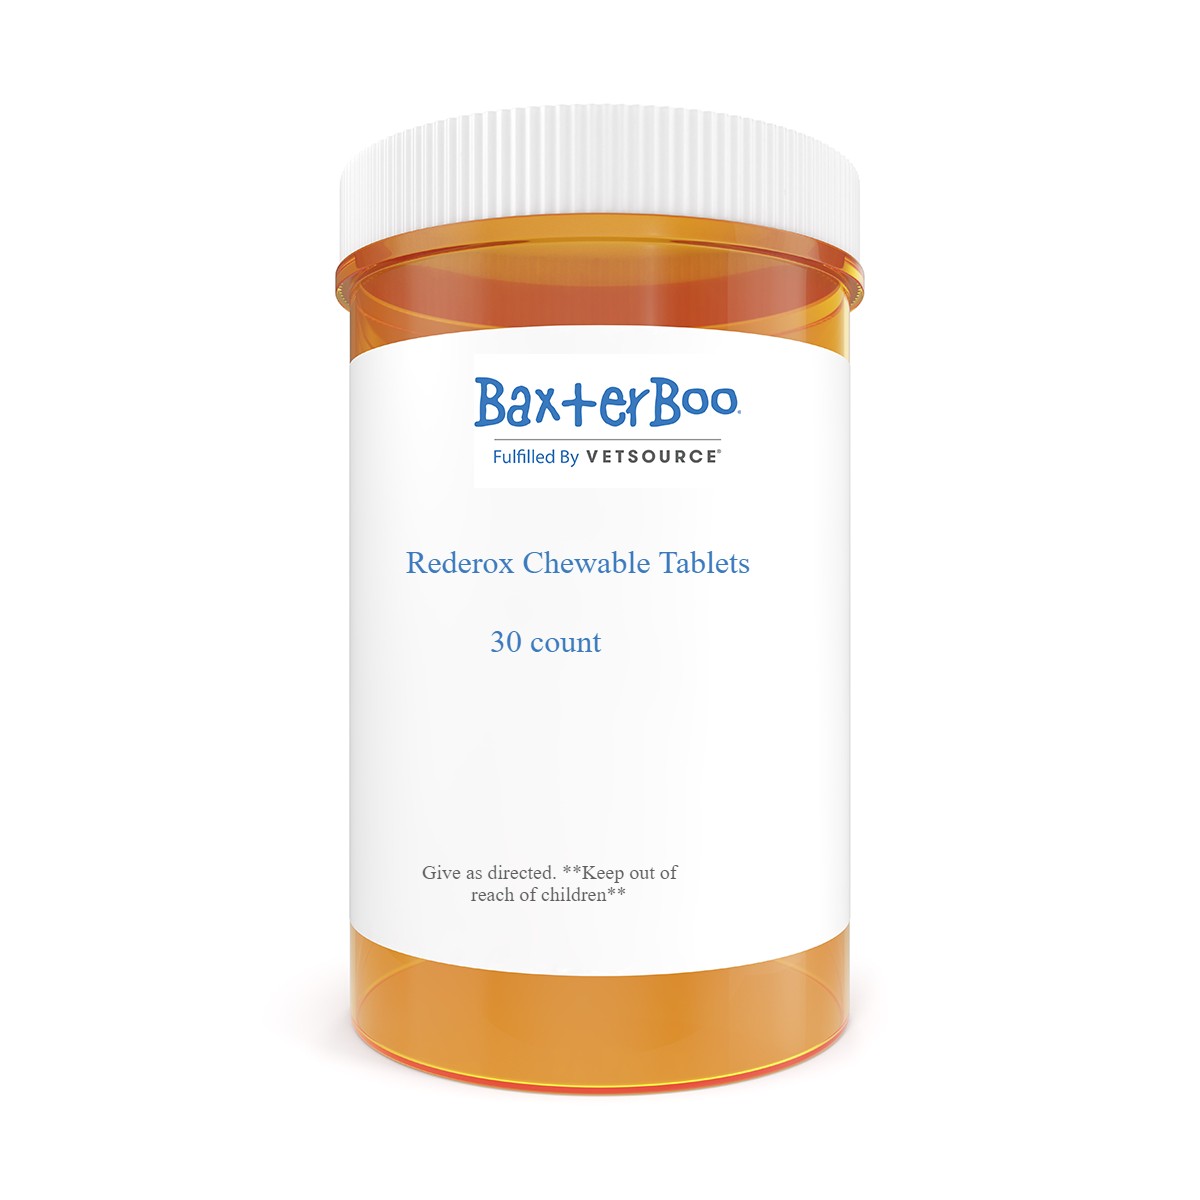 Rederox Chewable Tablets